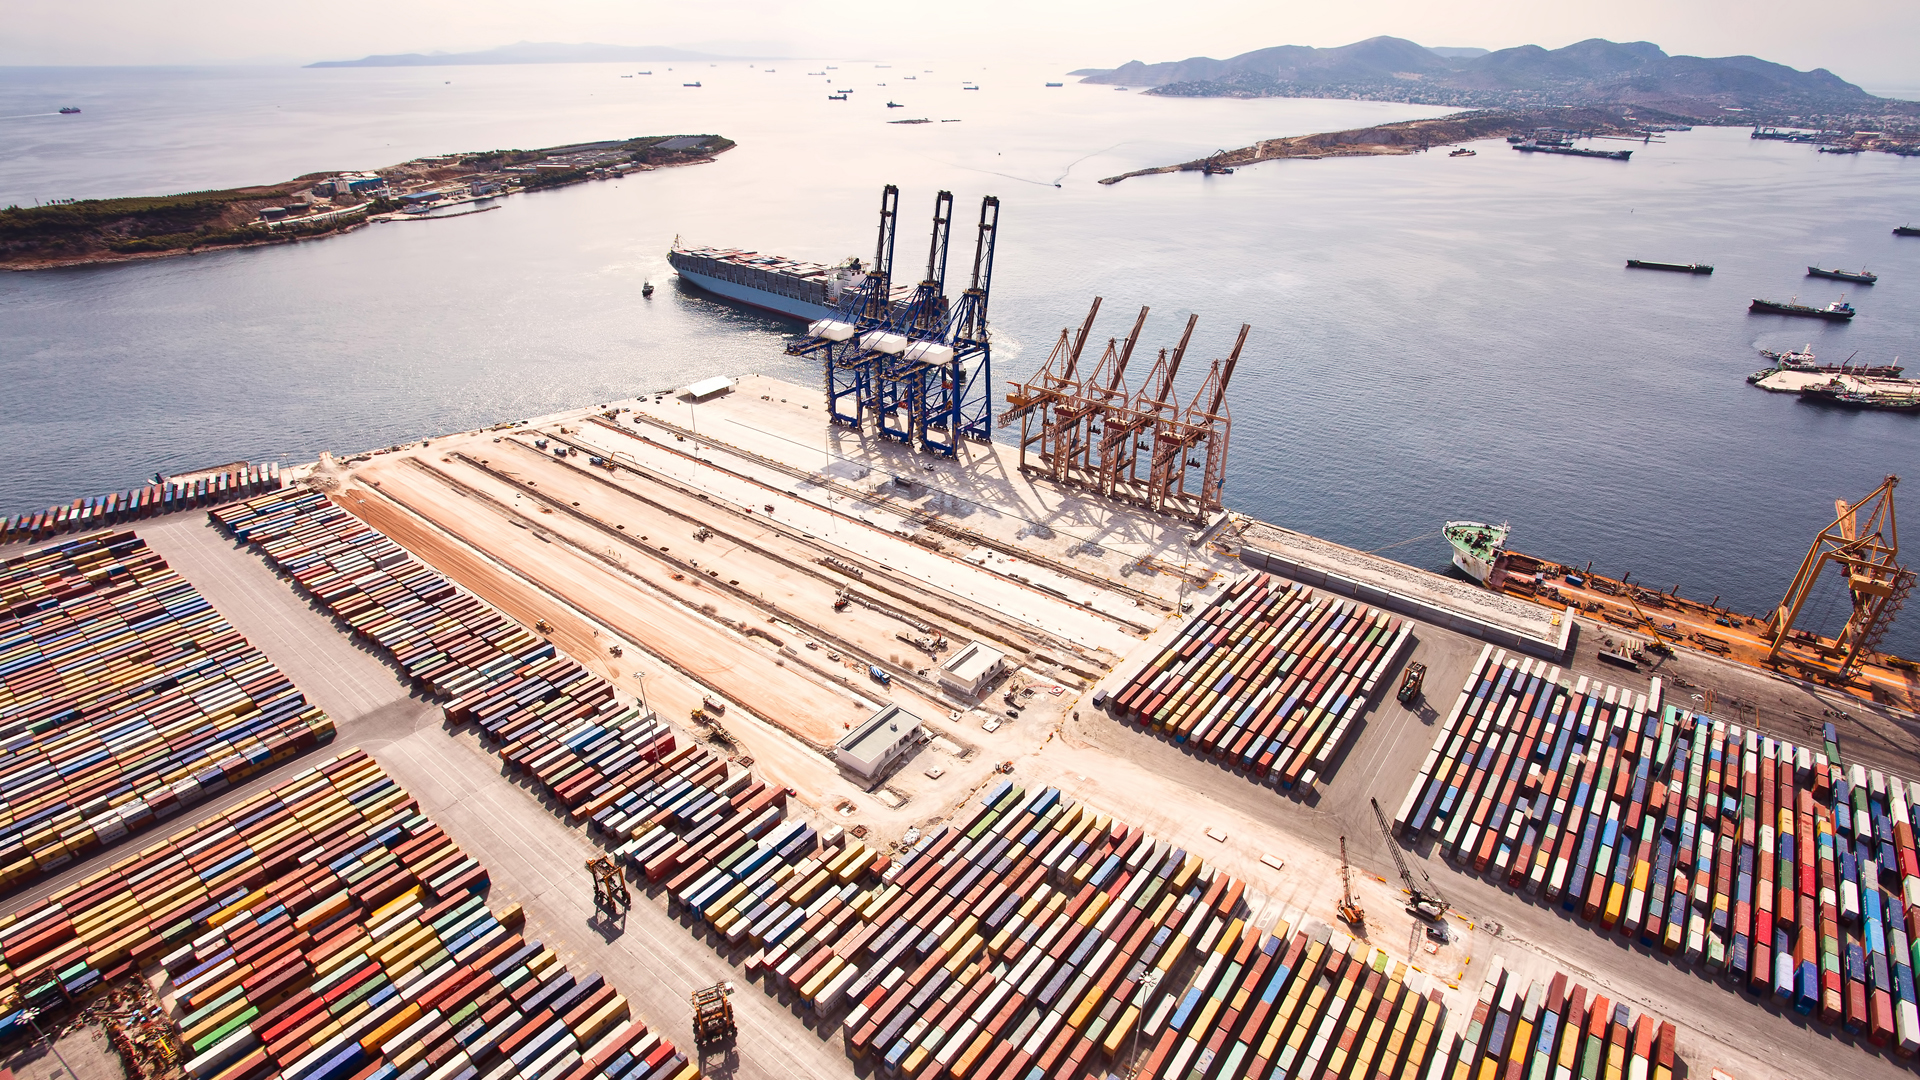 shipping containers and cranes